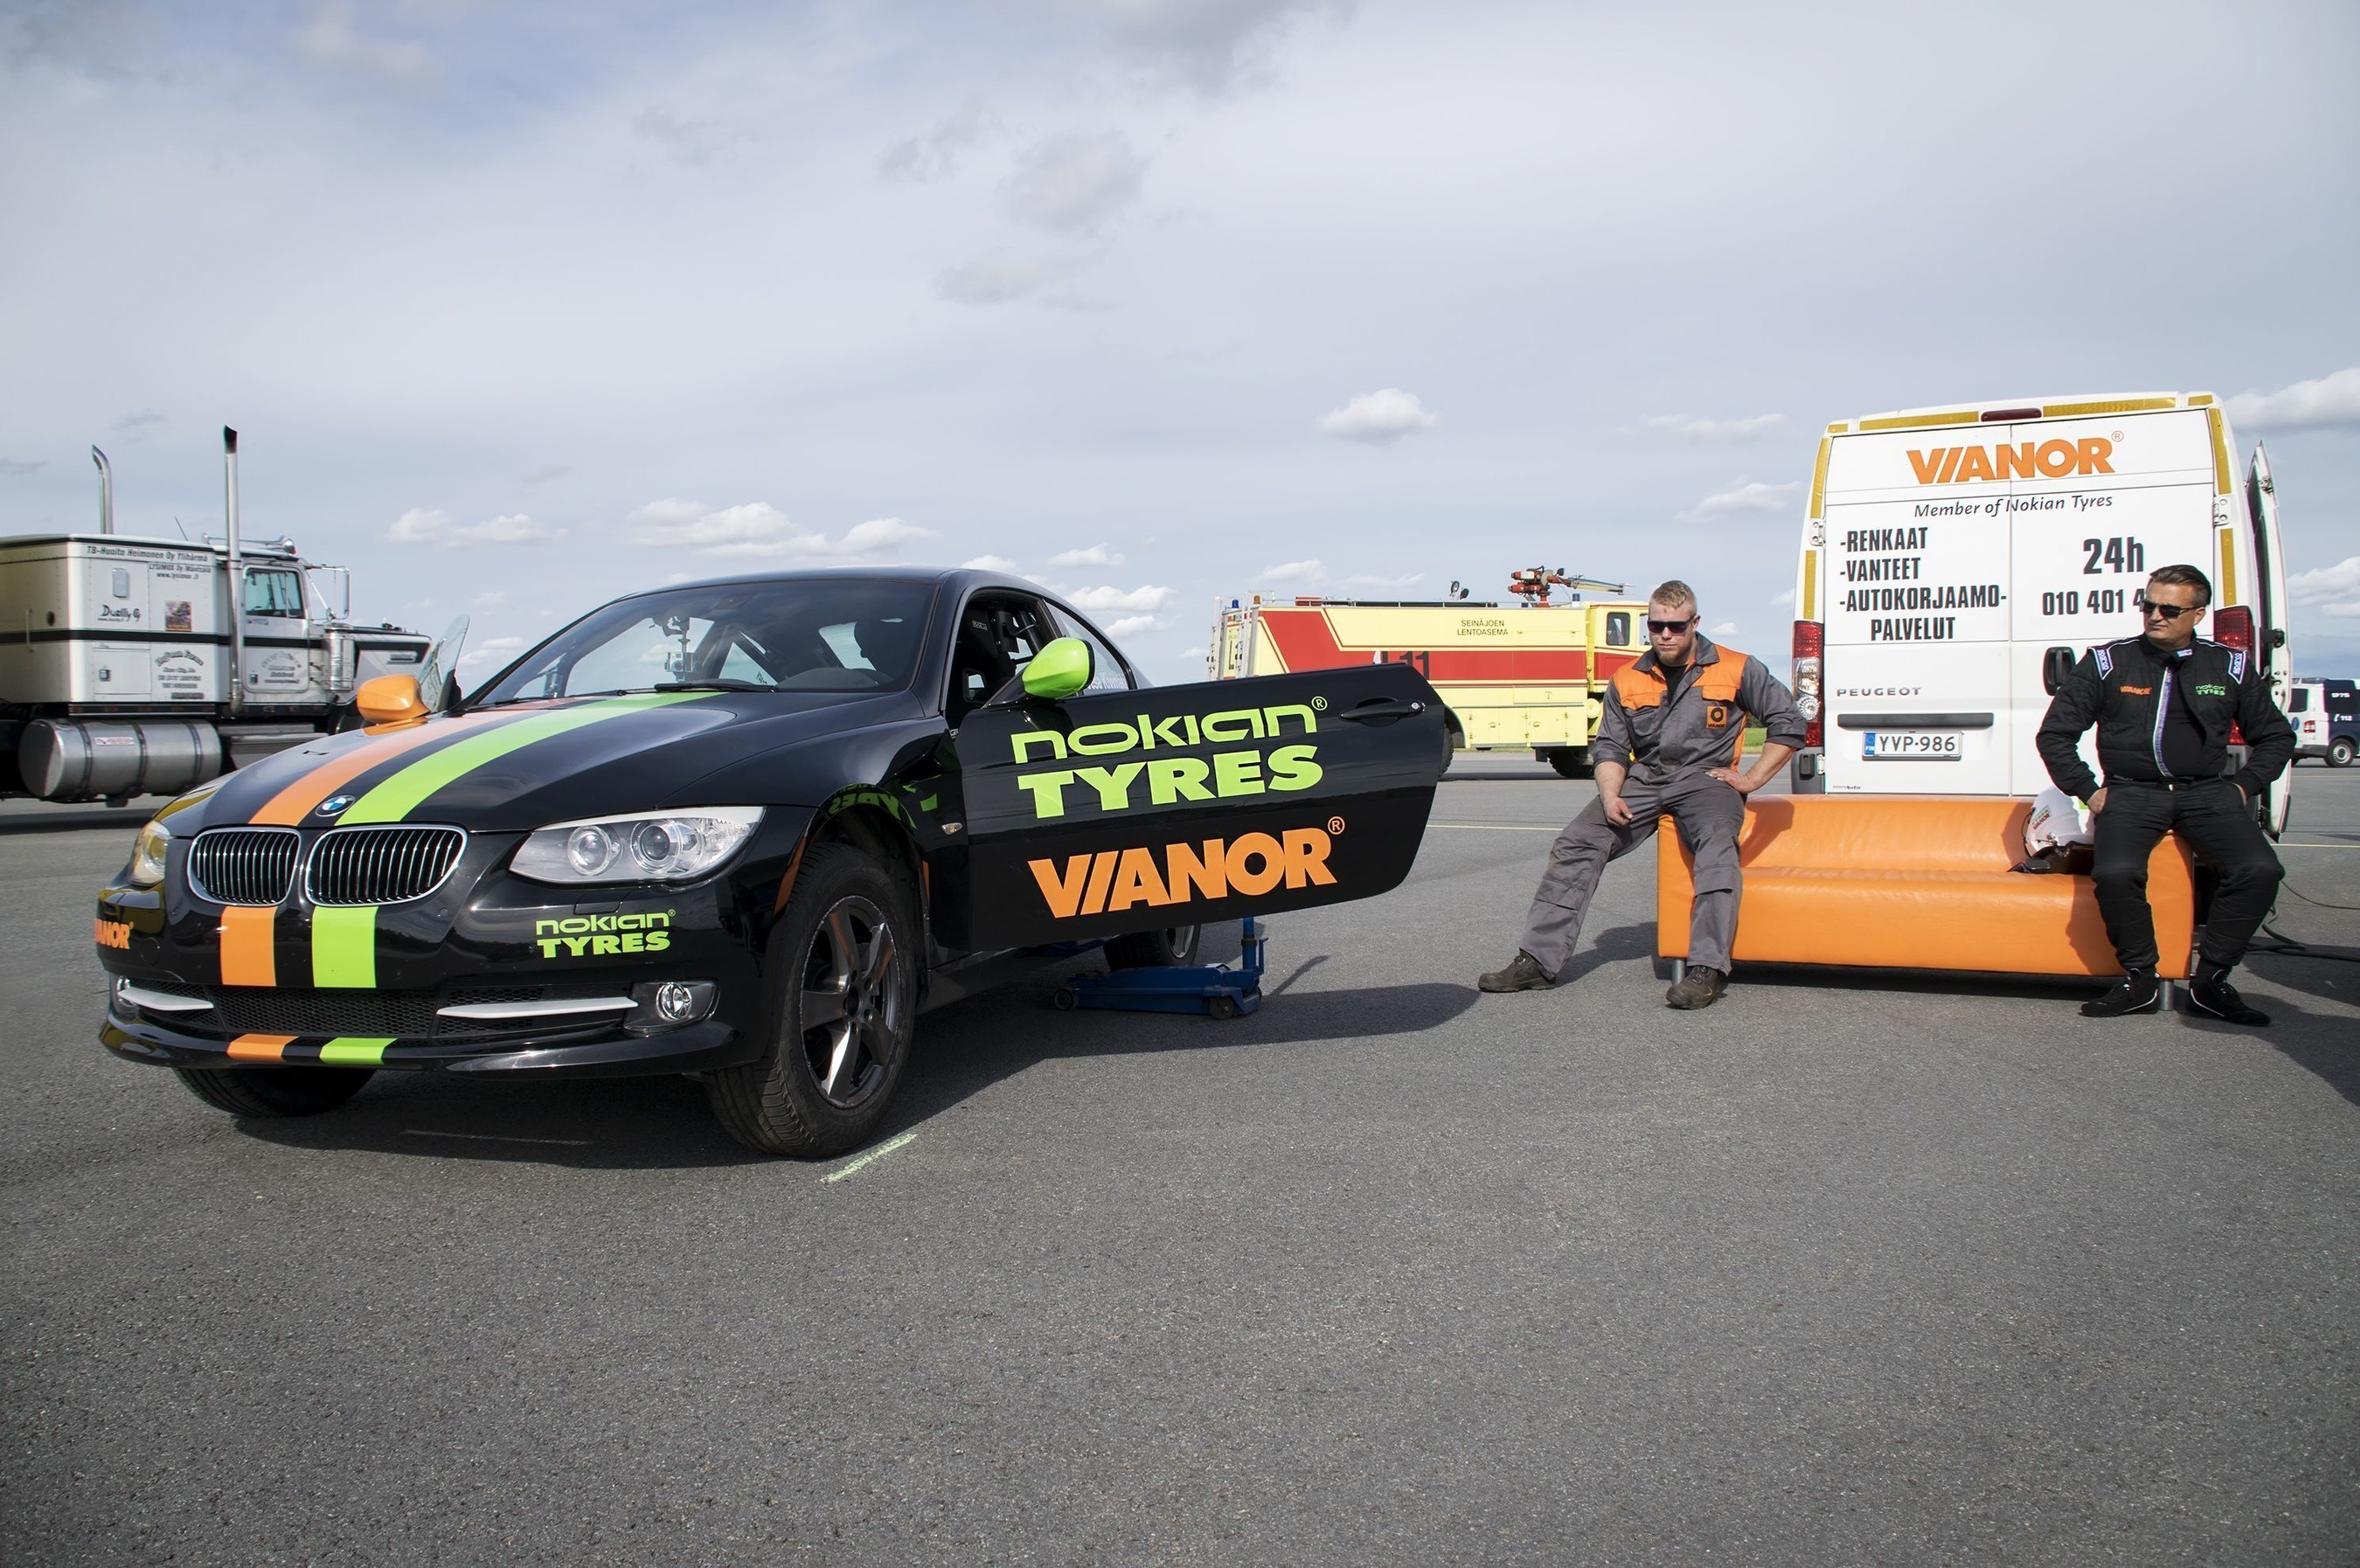 Nokian Tyres - Fastest side wheelie in a car. The new world record for Fastest side wheelie in a car was set when Nokian Tyres, Vianor and stunt driver Vesa Kivimäki combined their strengths. The new world record was powered by Nokian Tyres Aramid Sidewall technology and tyre maitenance by Vianor pit crew. More: www.nokiantyres.com/fastestwheelie (PRNewsFoto/Nokian Tyres)